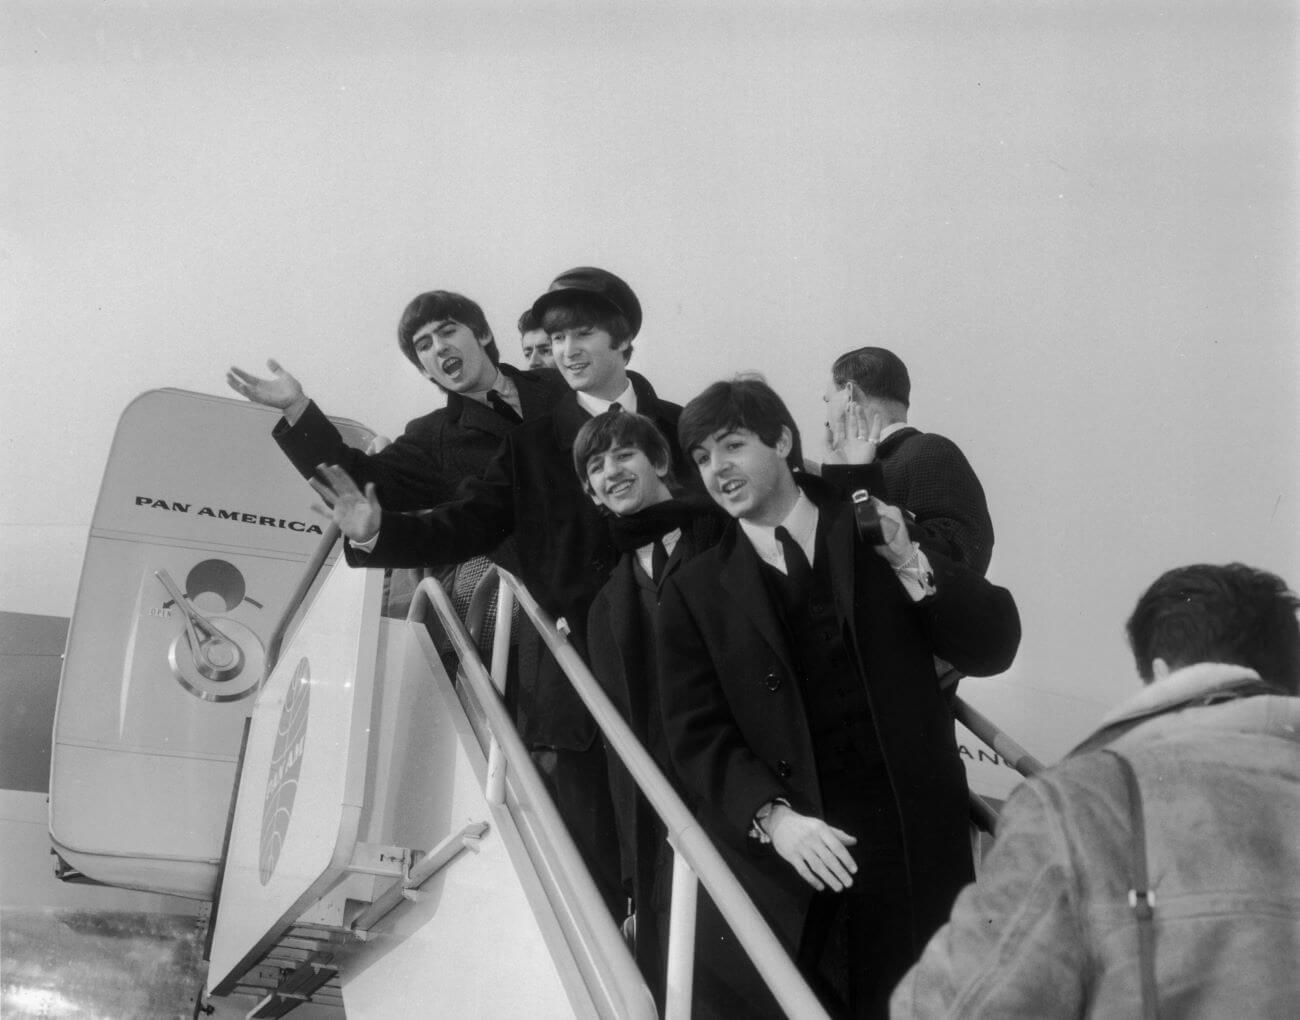 A black and white picture of George Harrison, John Lennon, Ringo Starr, and Paul McCartney on a staircase leaving a plane.